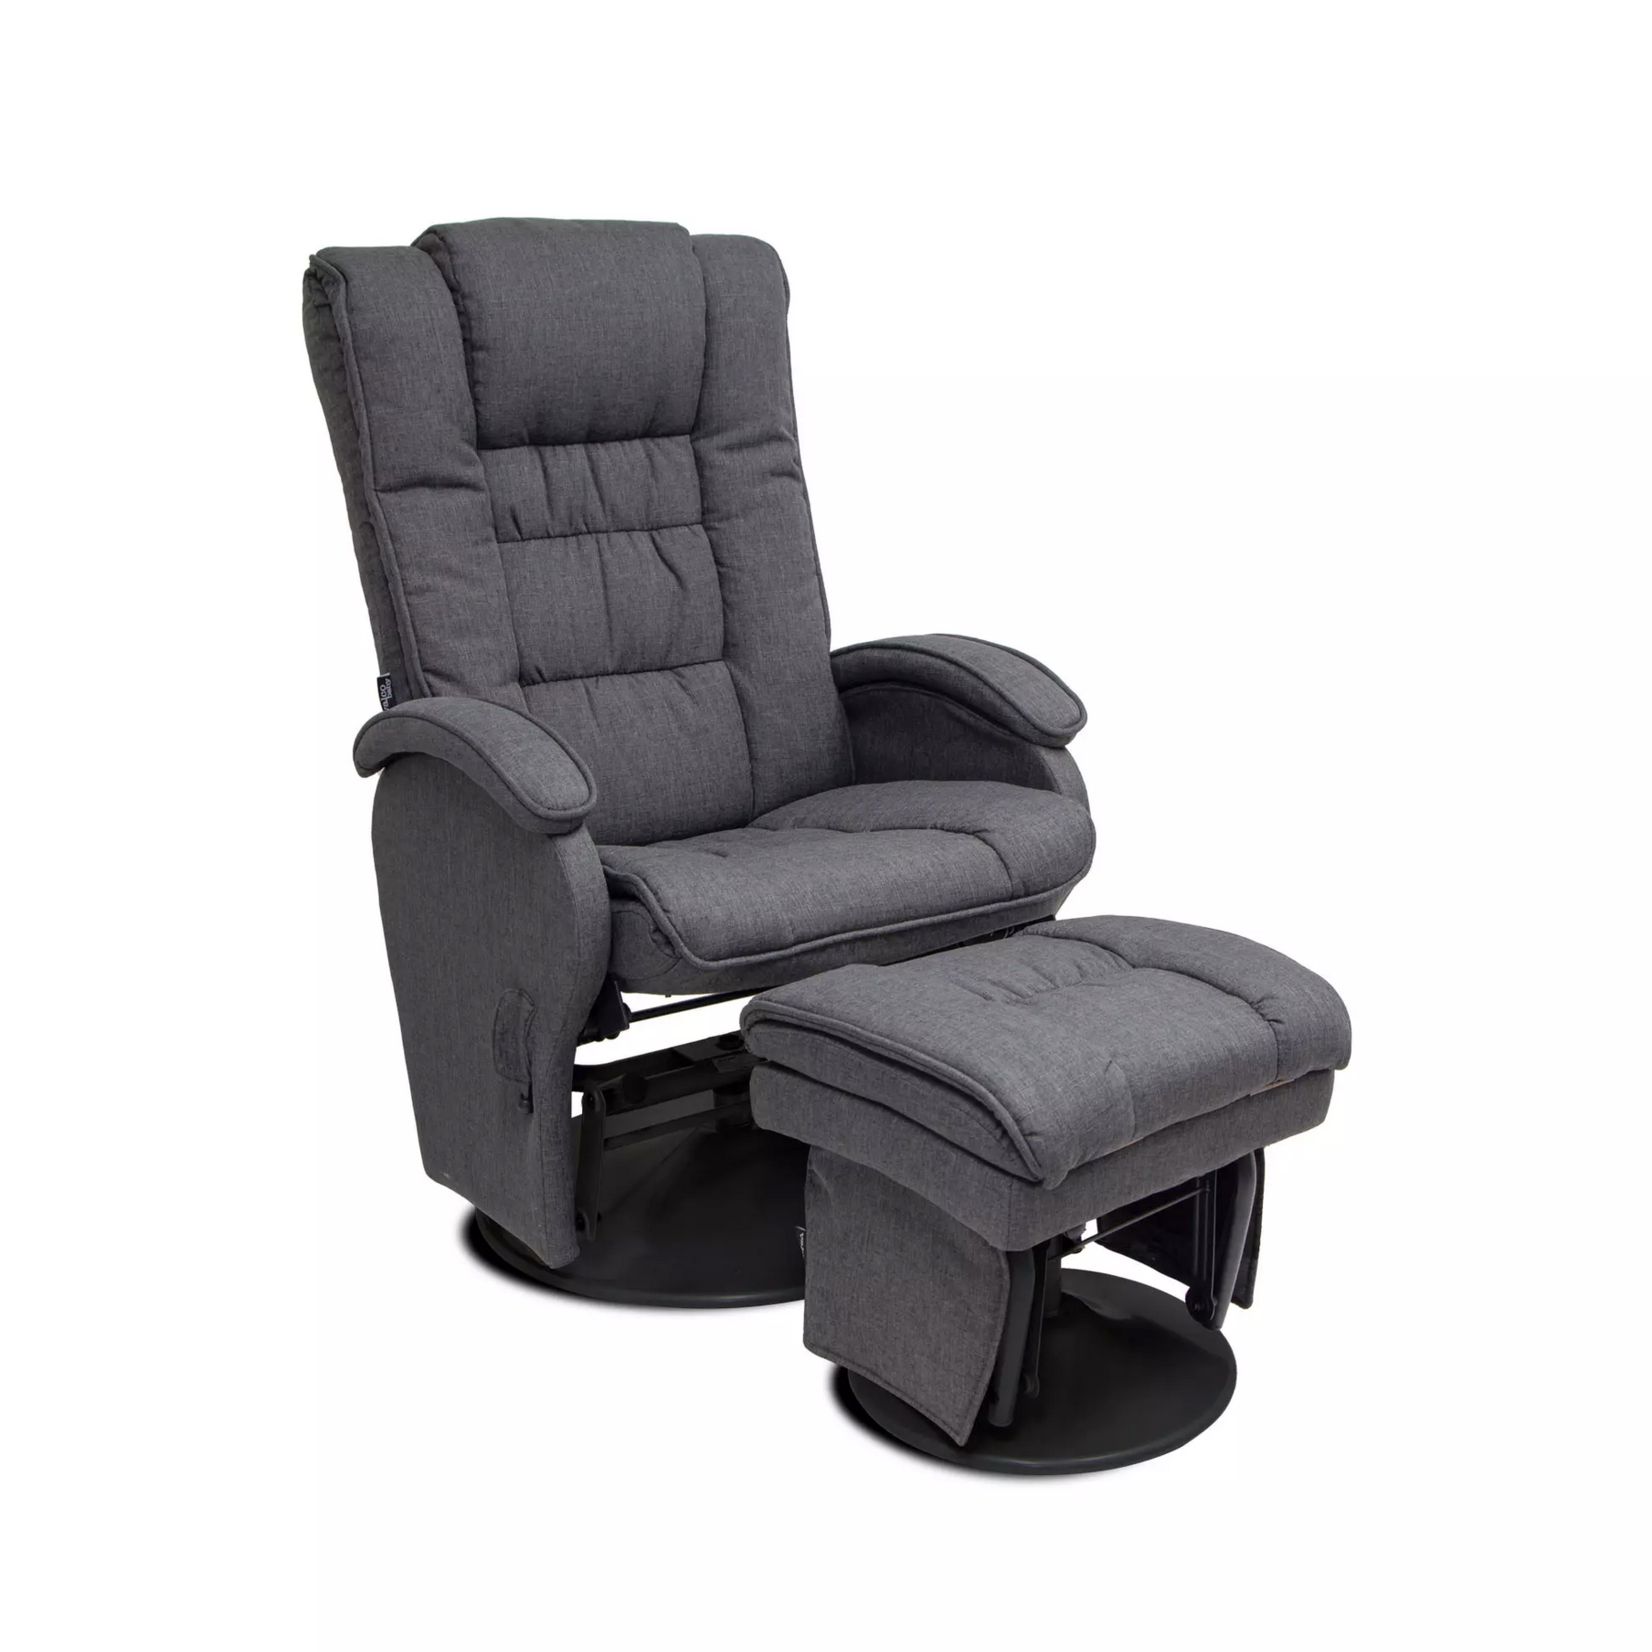 Valco Baby Eurobell Glider And Ottoman-Oyster Grey